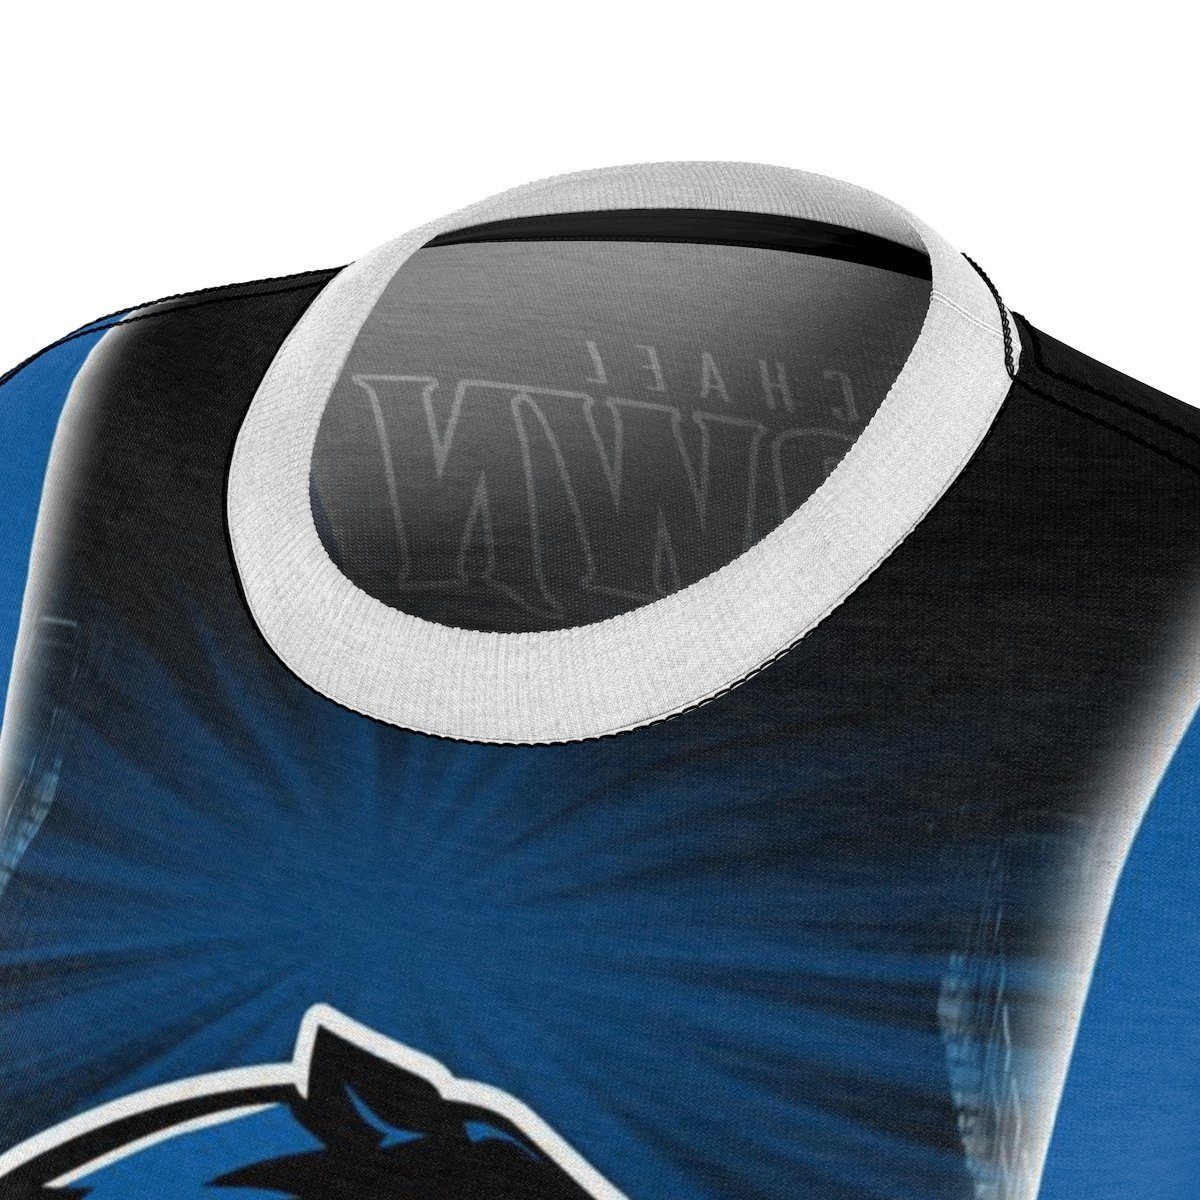 Full Court - V.2 - Extreme Sportswear Women's Cut & Sew Template-Photoshop Template - Photo Solutions